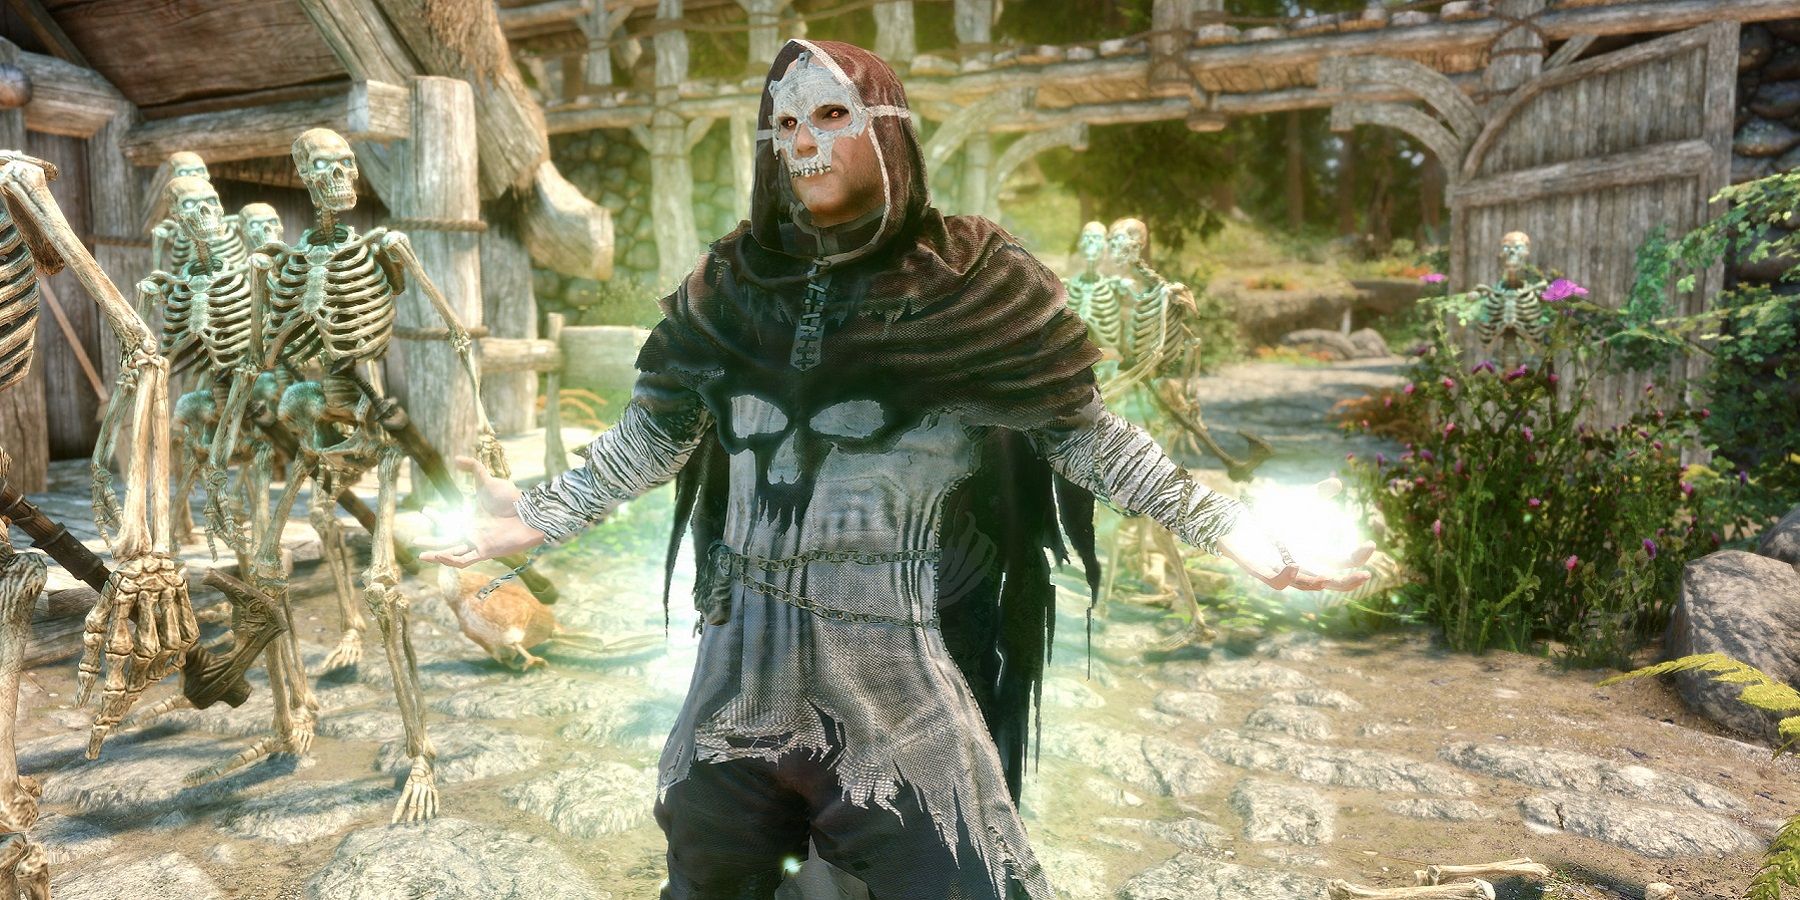 Screenshot from Skyrim showing the necromancer robes from the Skyblivion remake..